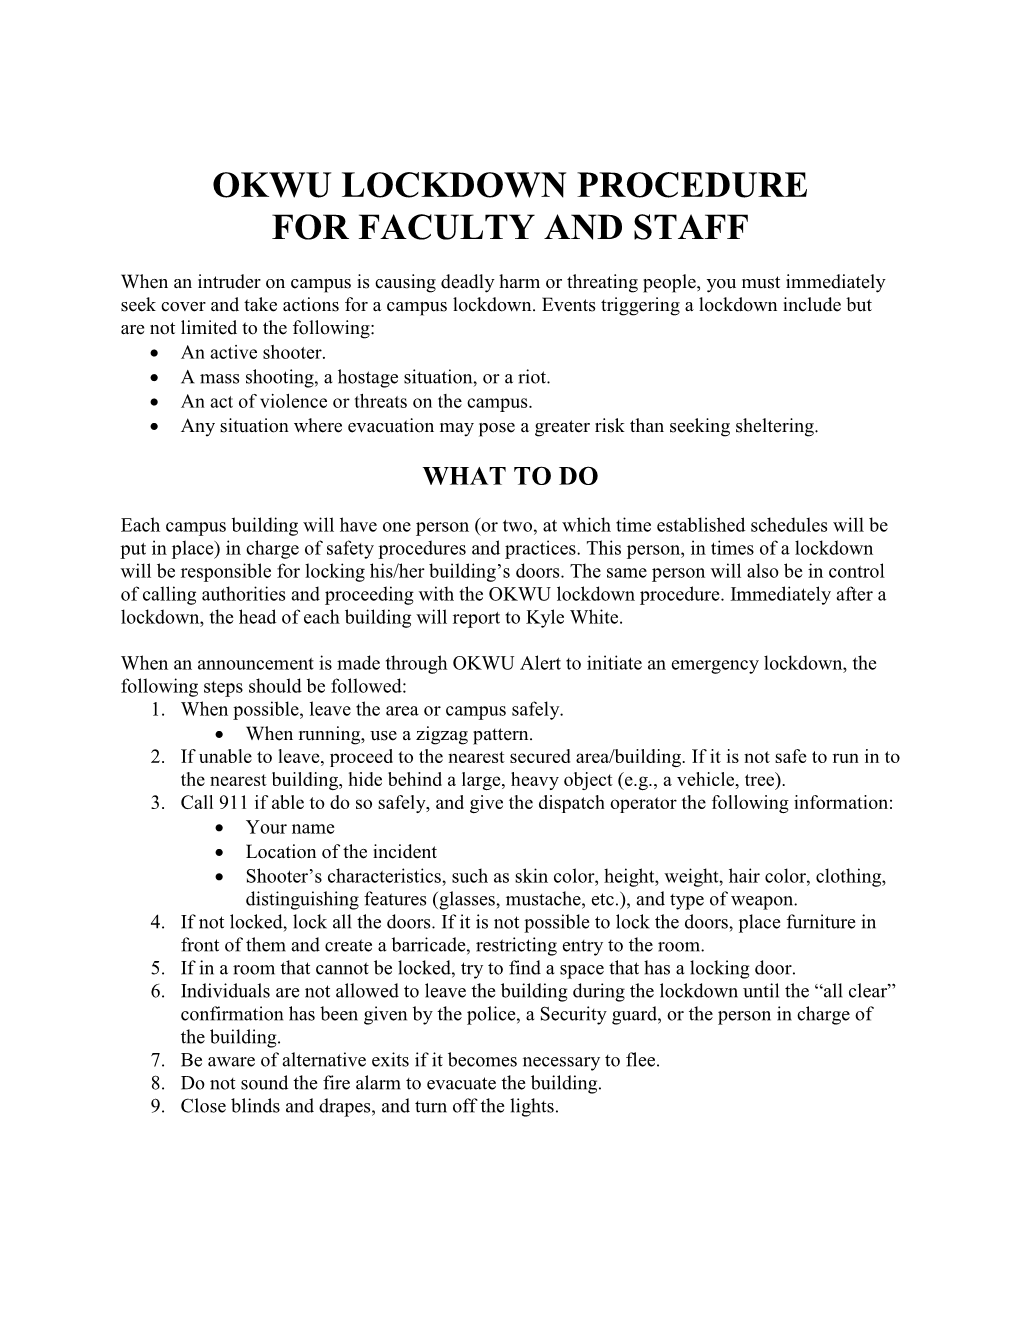 Okwu Lockdown Procedure for Faculty and Staff